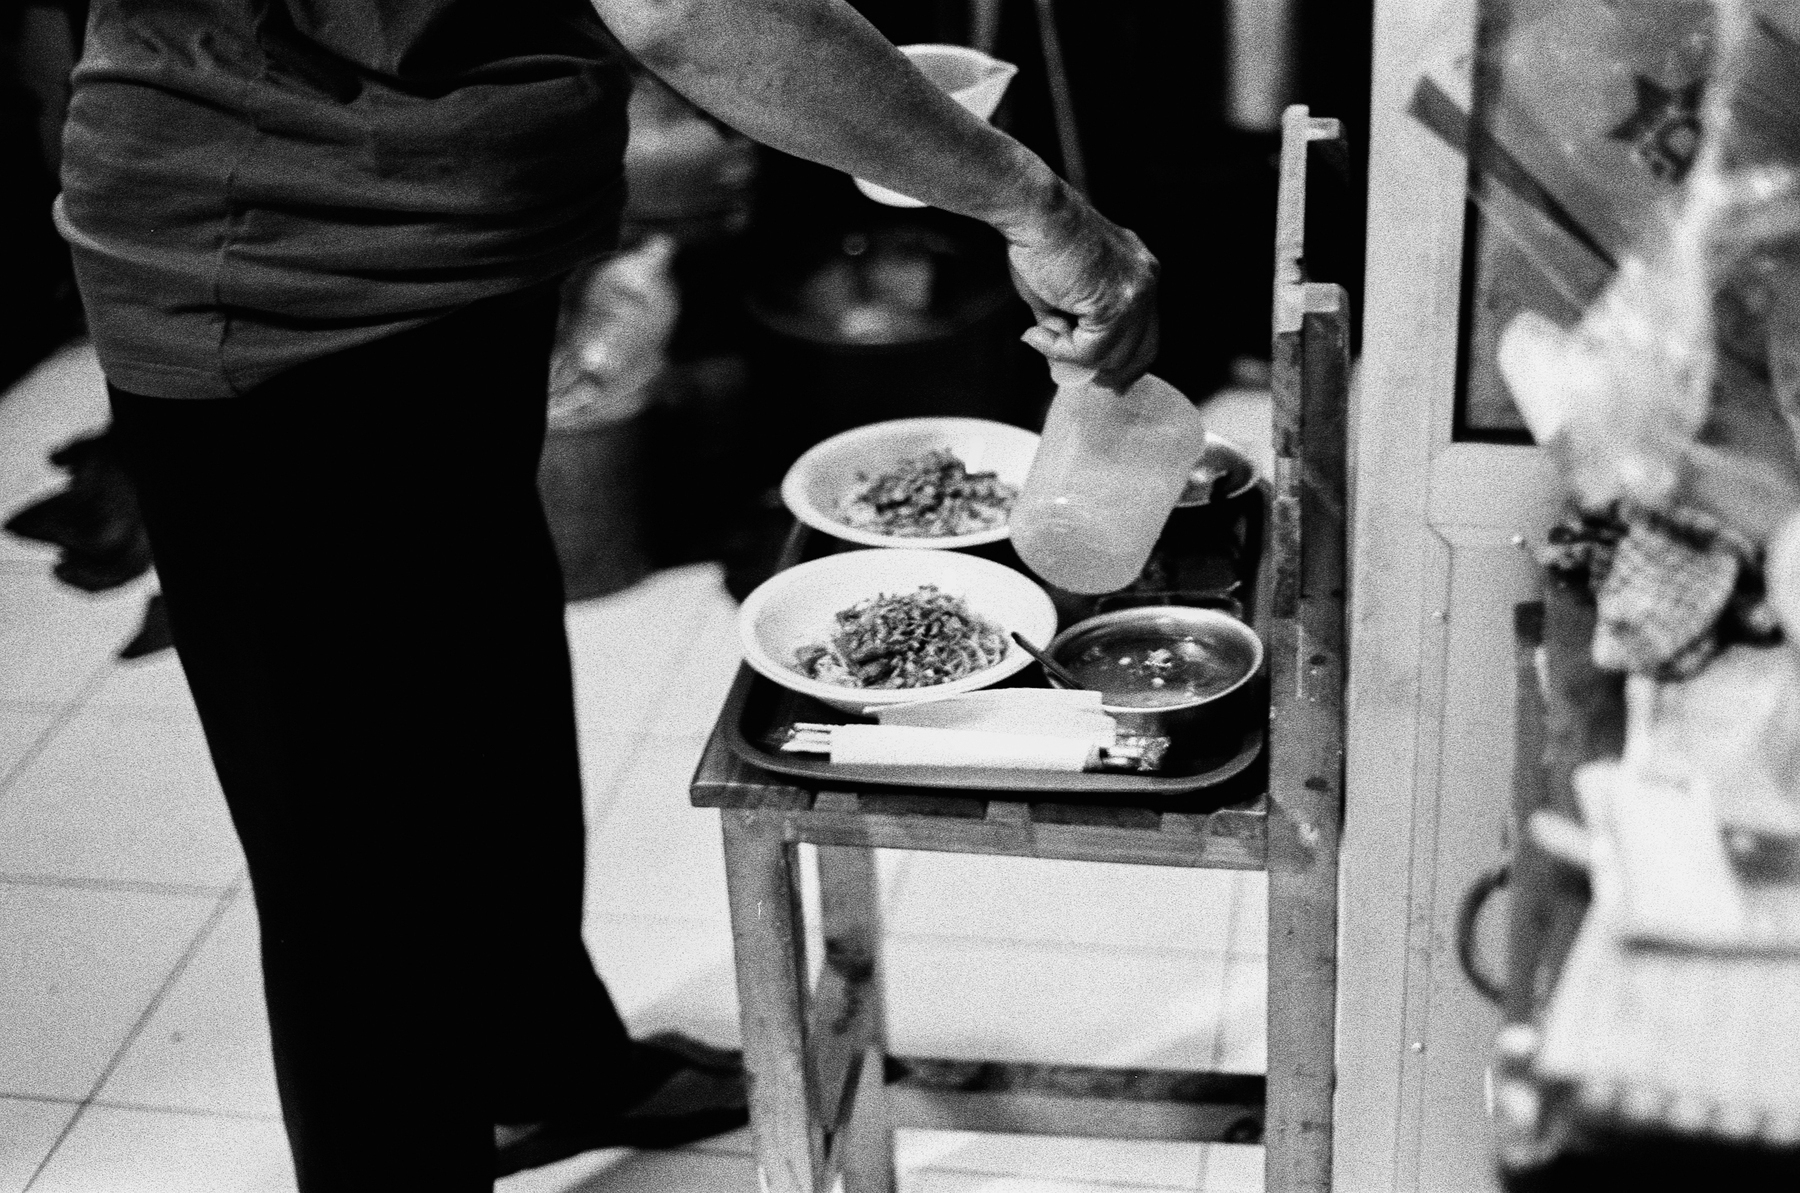 a scan of a black and white photo of a person's feet, hovering near where there are noodles and soup being prepared on a tray